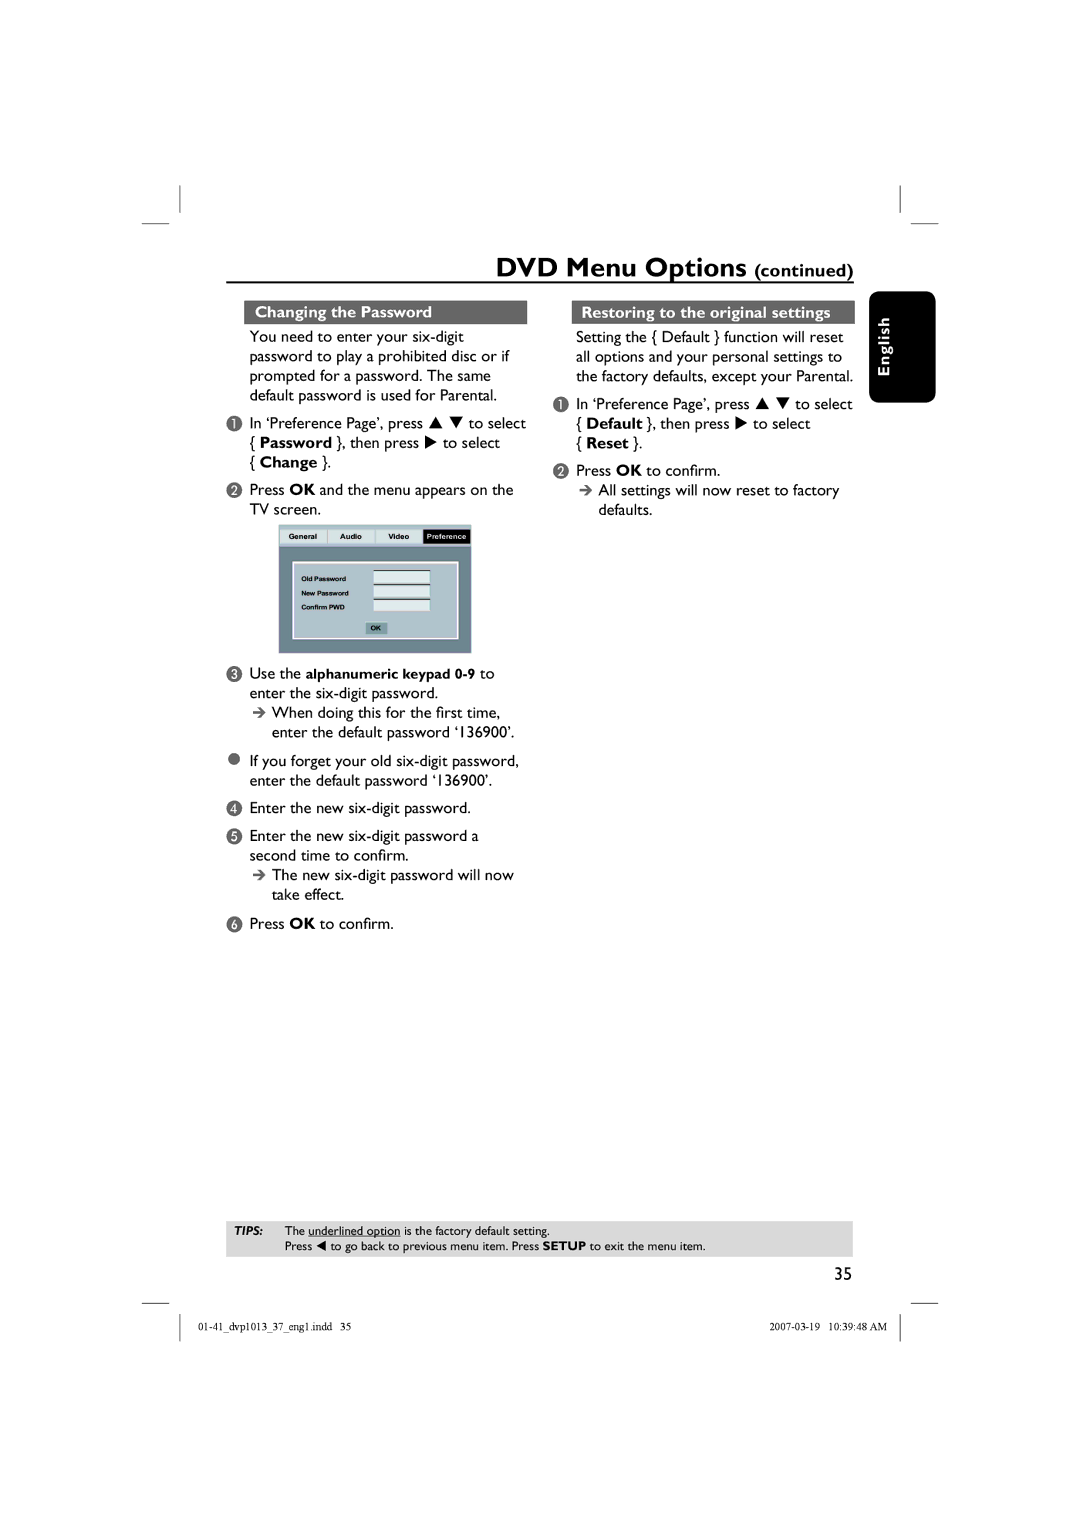 Philips DVP1013 manual Changing the Password, Change, Restoring to the original settings, Reset 